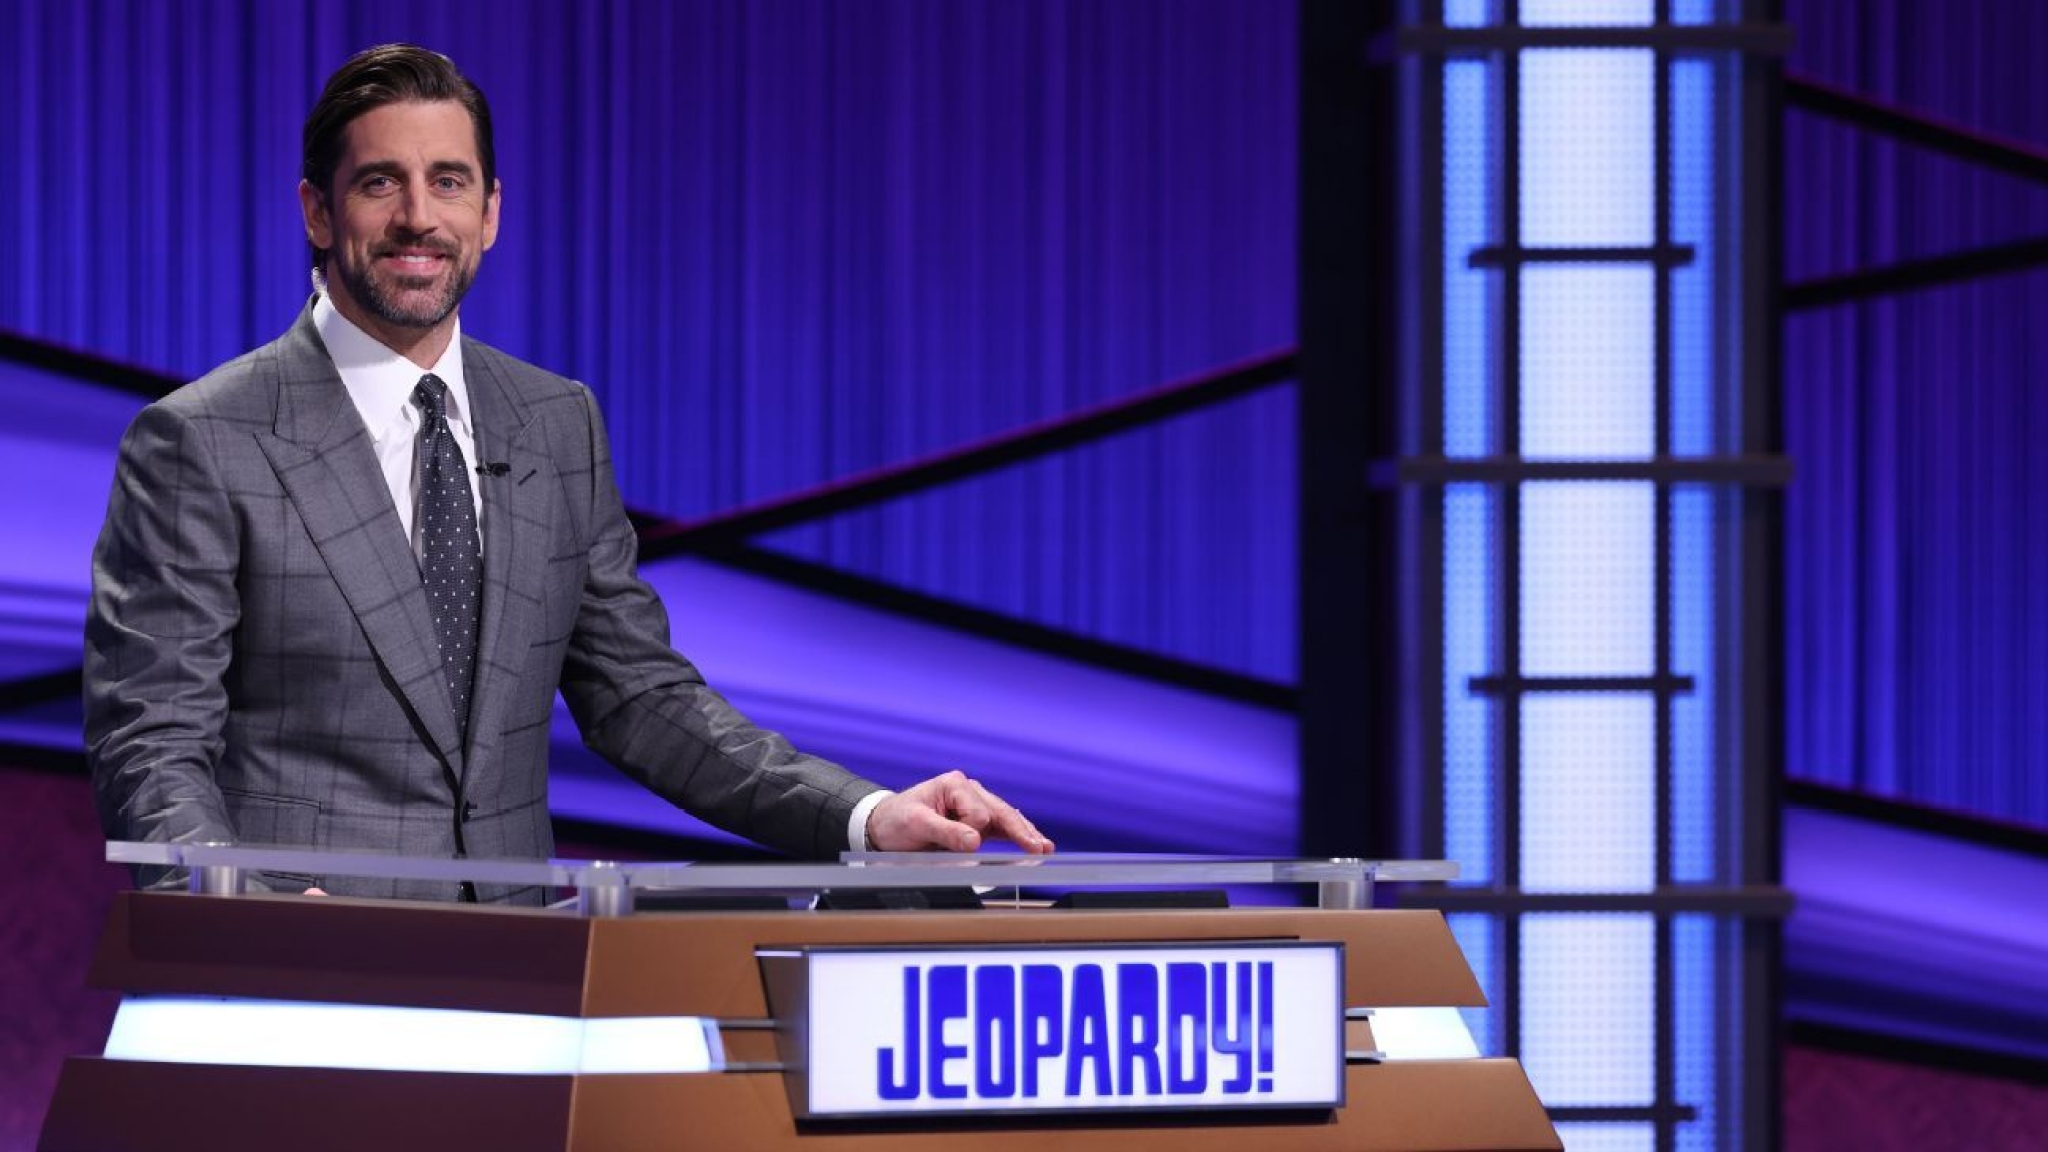 Rodgers says he’d love to be ‘Jeopardy!’ host